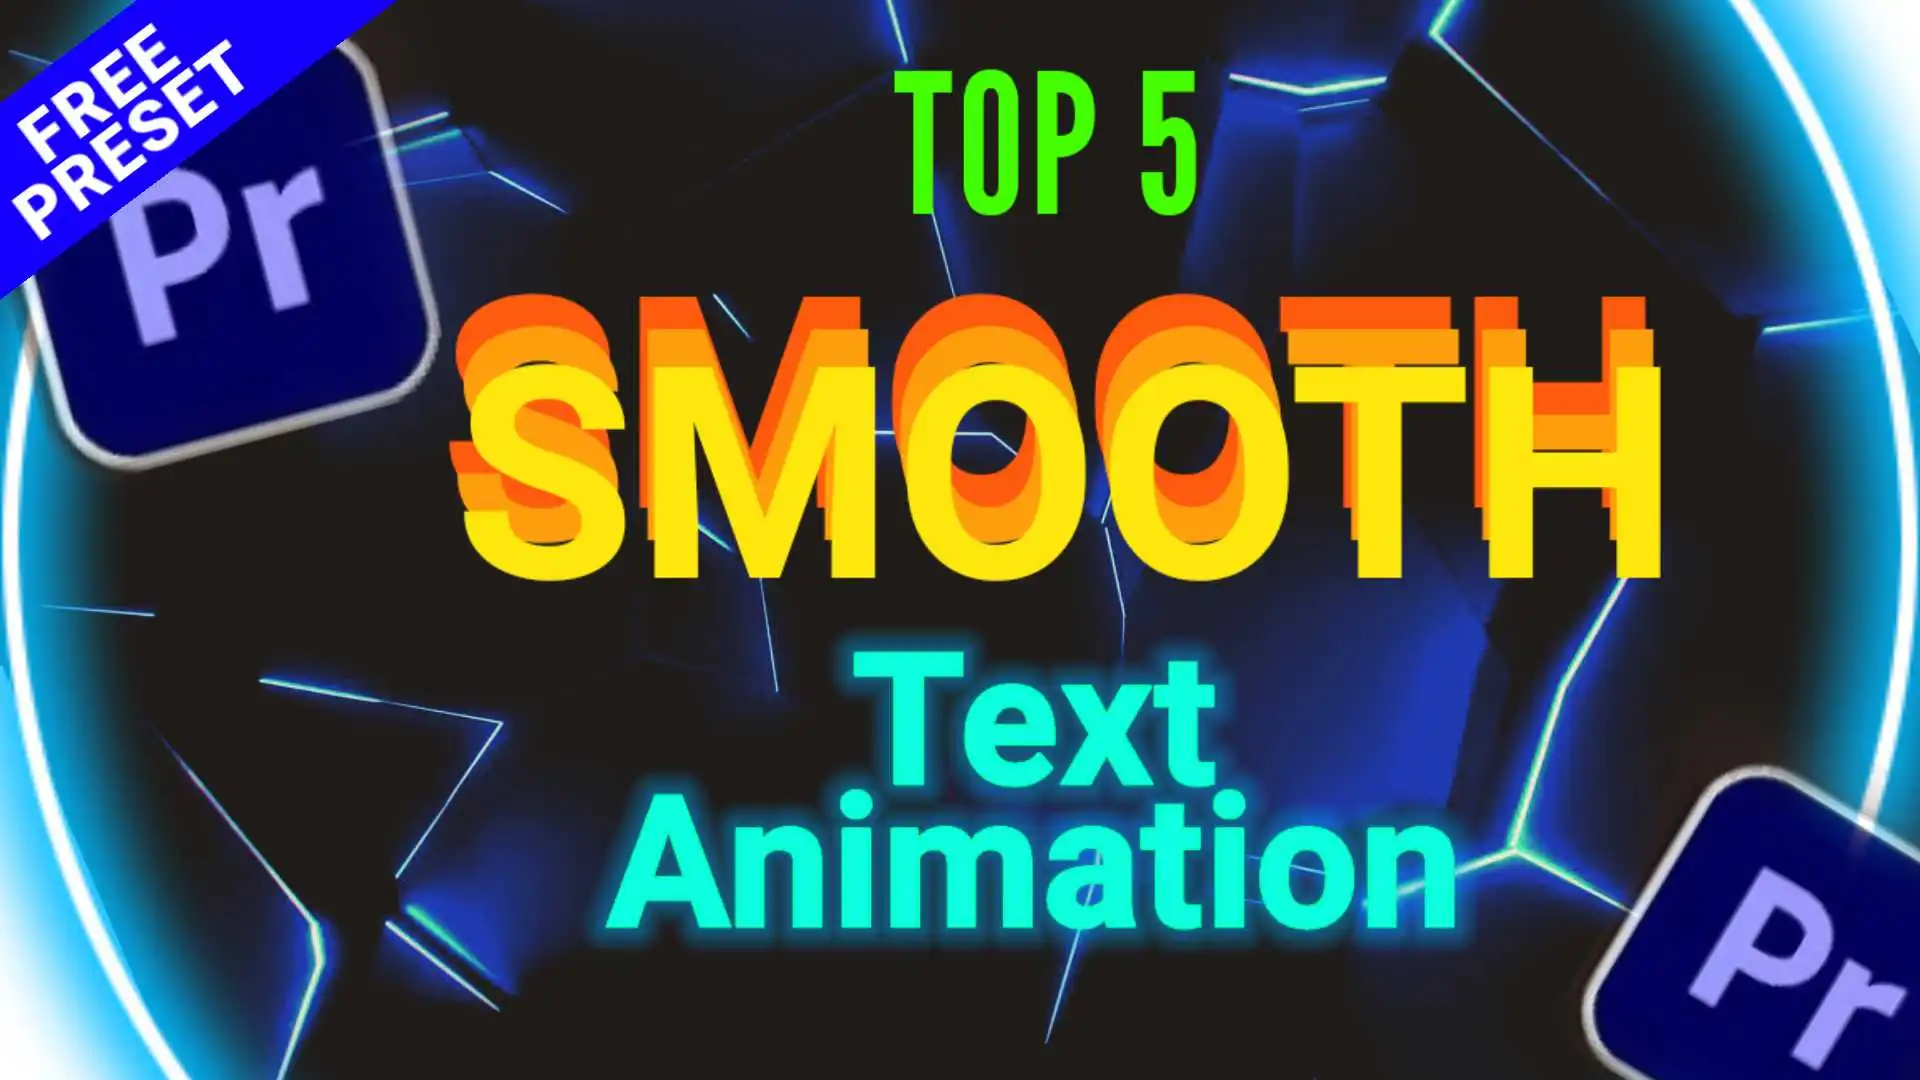 Top 5 Smooth Text Animation Premiere Pro Presets Free Download